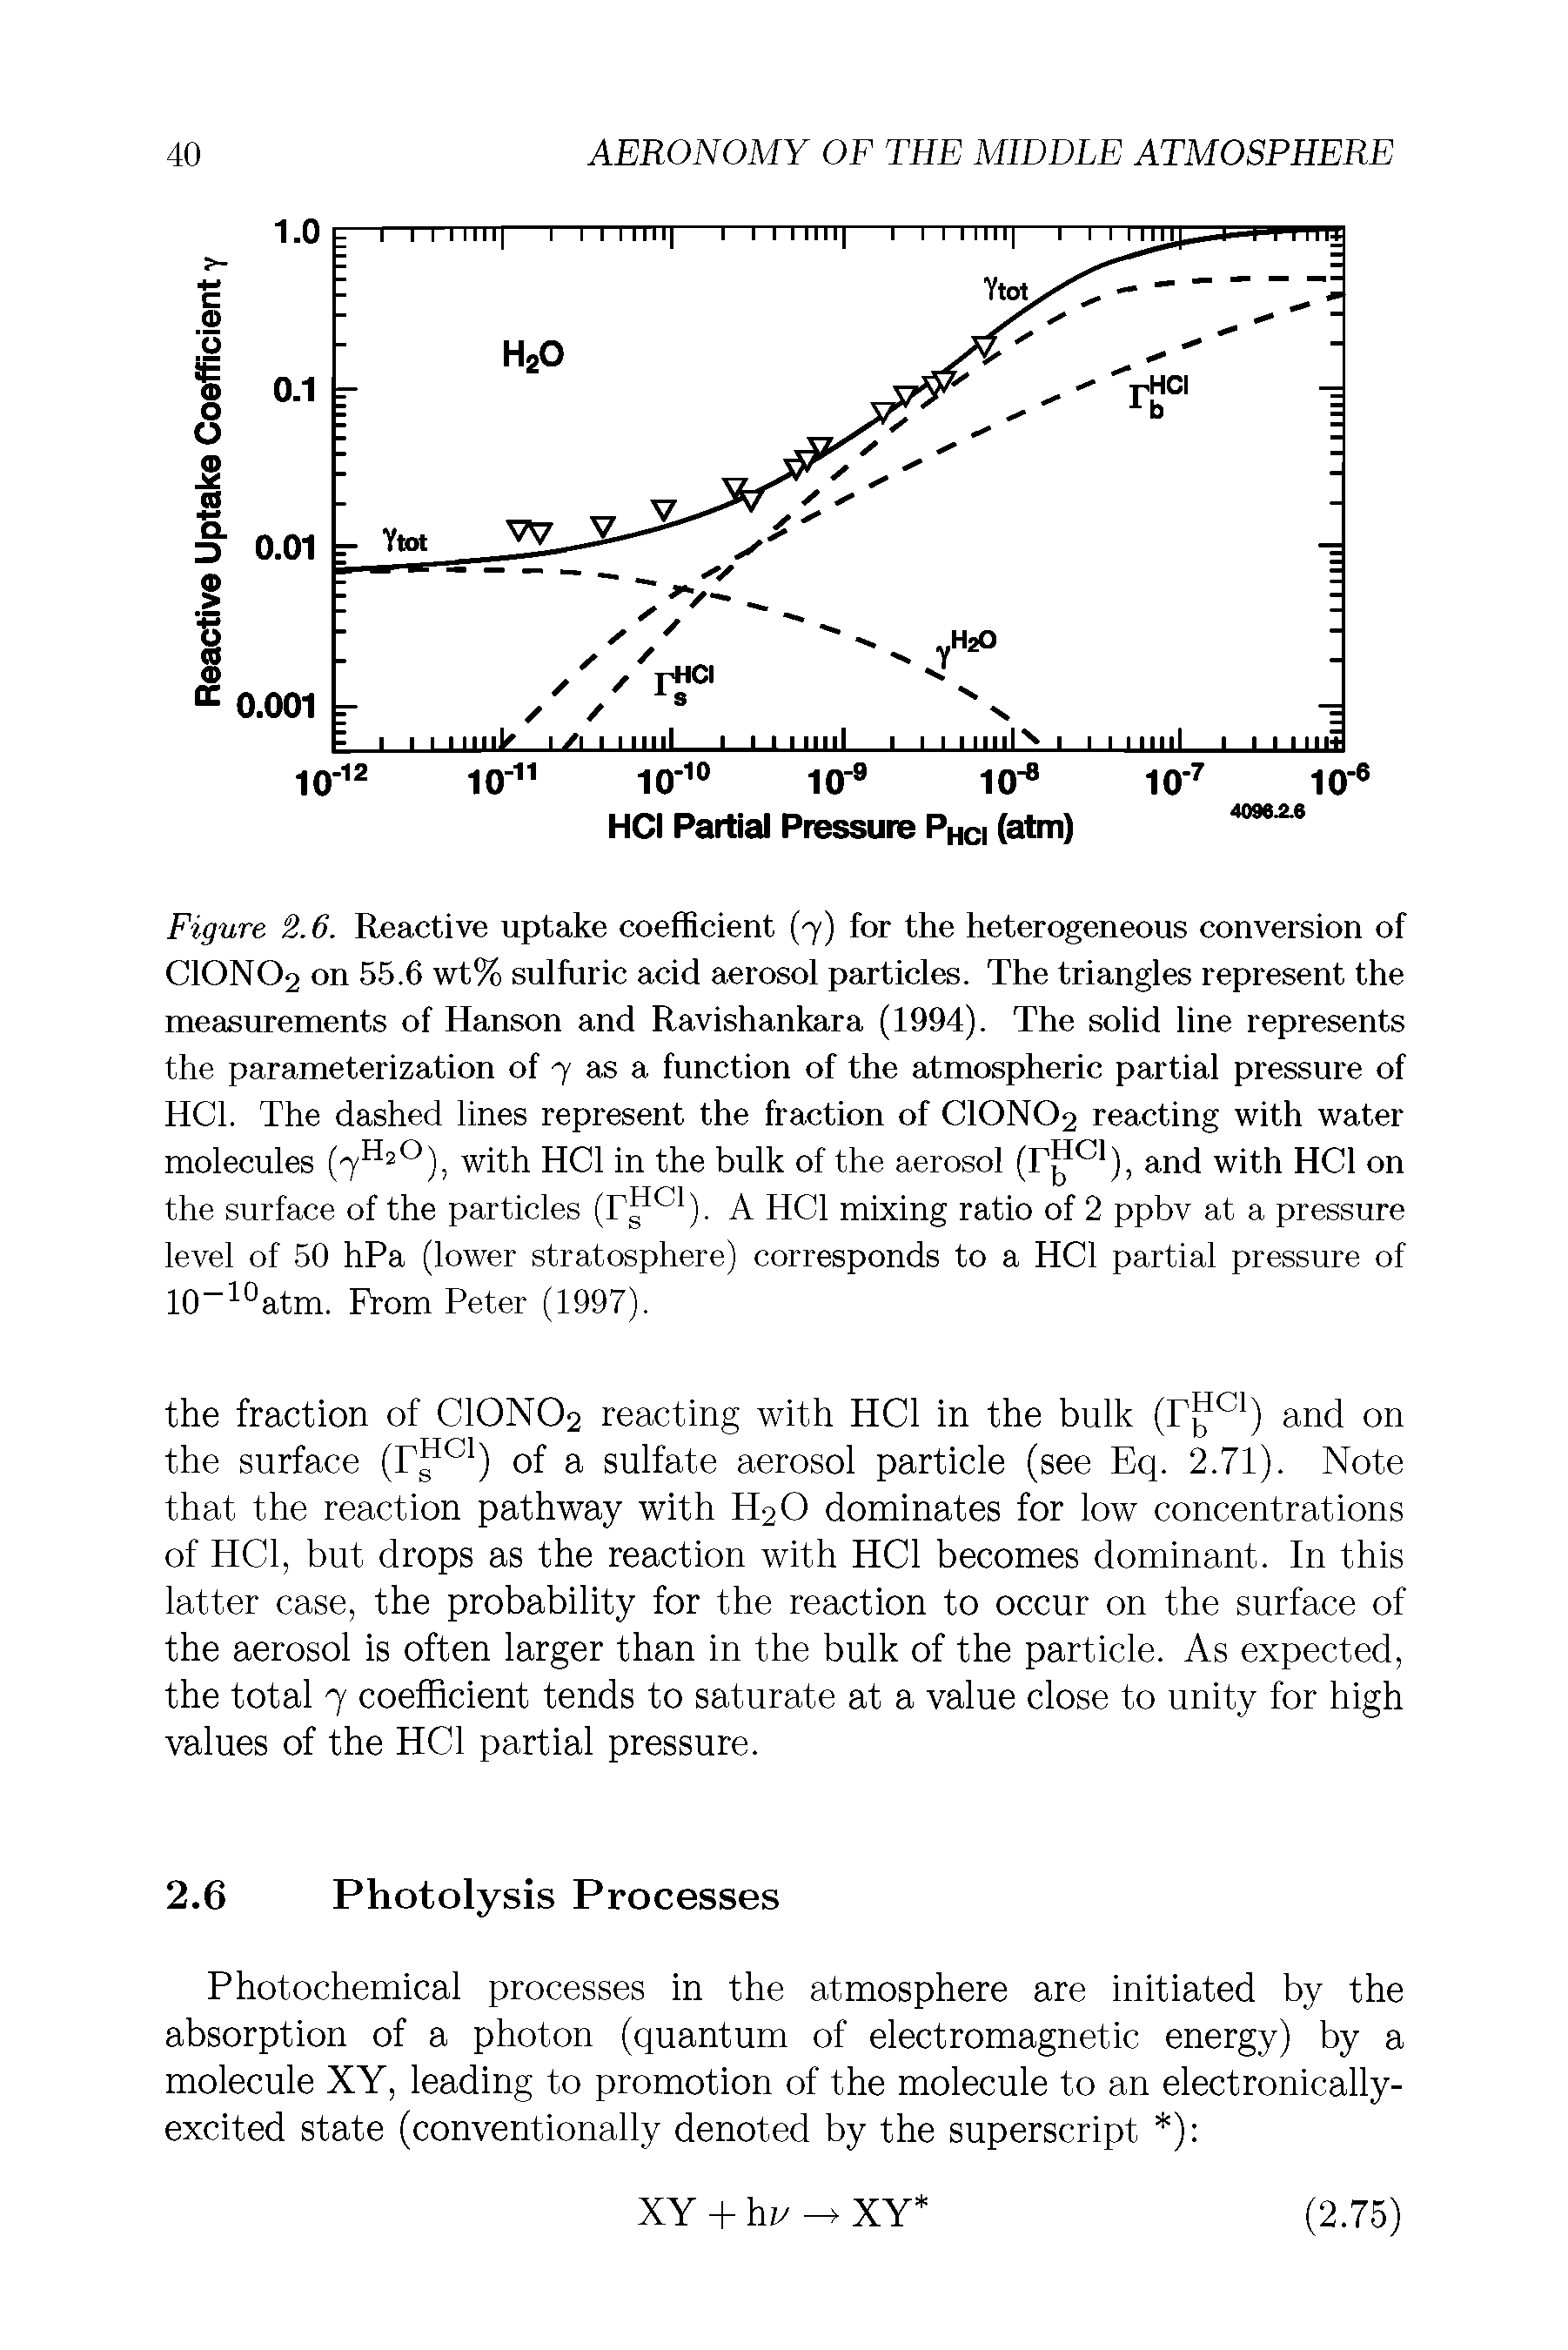 Figure 2.6. Reactive uptake coefficient (7) for the heterogeneous conversion of CIONO2 on 55.6 wt% sulfuric acid aerosol particles. The triangles represent the measurements of Hanson and Ravishankara (4994). The solid line represents the parameterization of 7 as a function of the atmospheric partial pressure of HC1. The dashed lines represent the fraction of CIONO2 reacting with water molecules (7H2°), with HC1 in the bulk of the aerosol (T C1), and with HC1 on the surface of the particles (T cl). A HC1 mixing ratio of 2 ppbv at a pressure level of 50 hPa (lower stratosphere) corresponds to a HC1 partial pressure of 10 10atm. From Peter (1997).